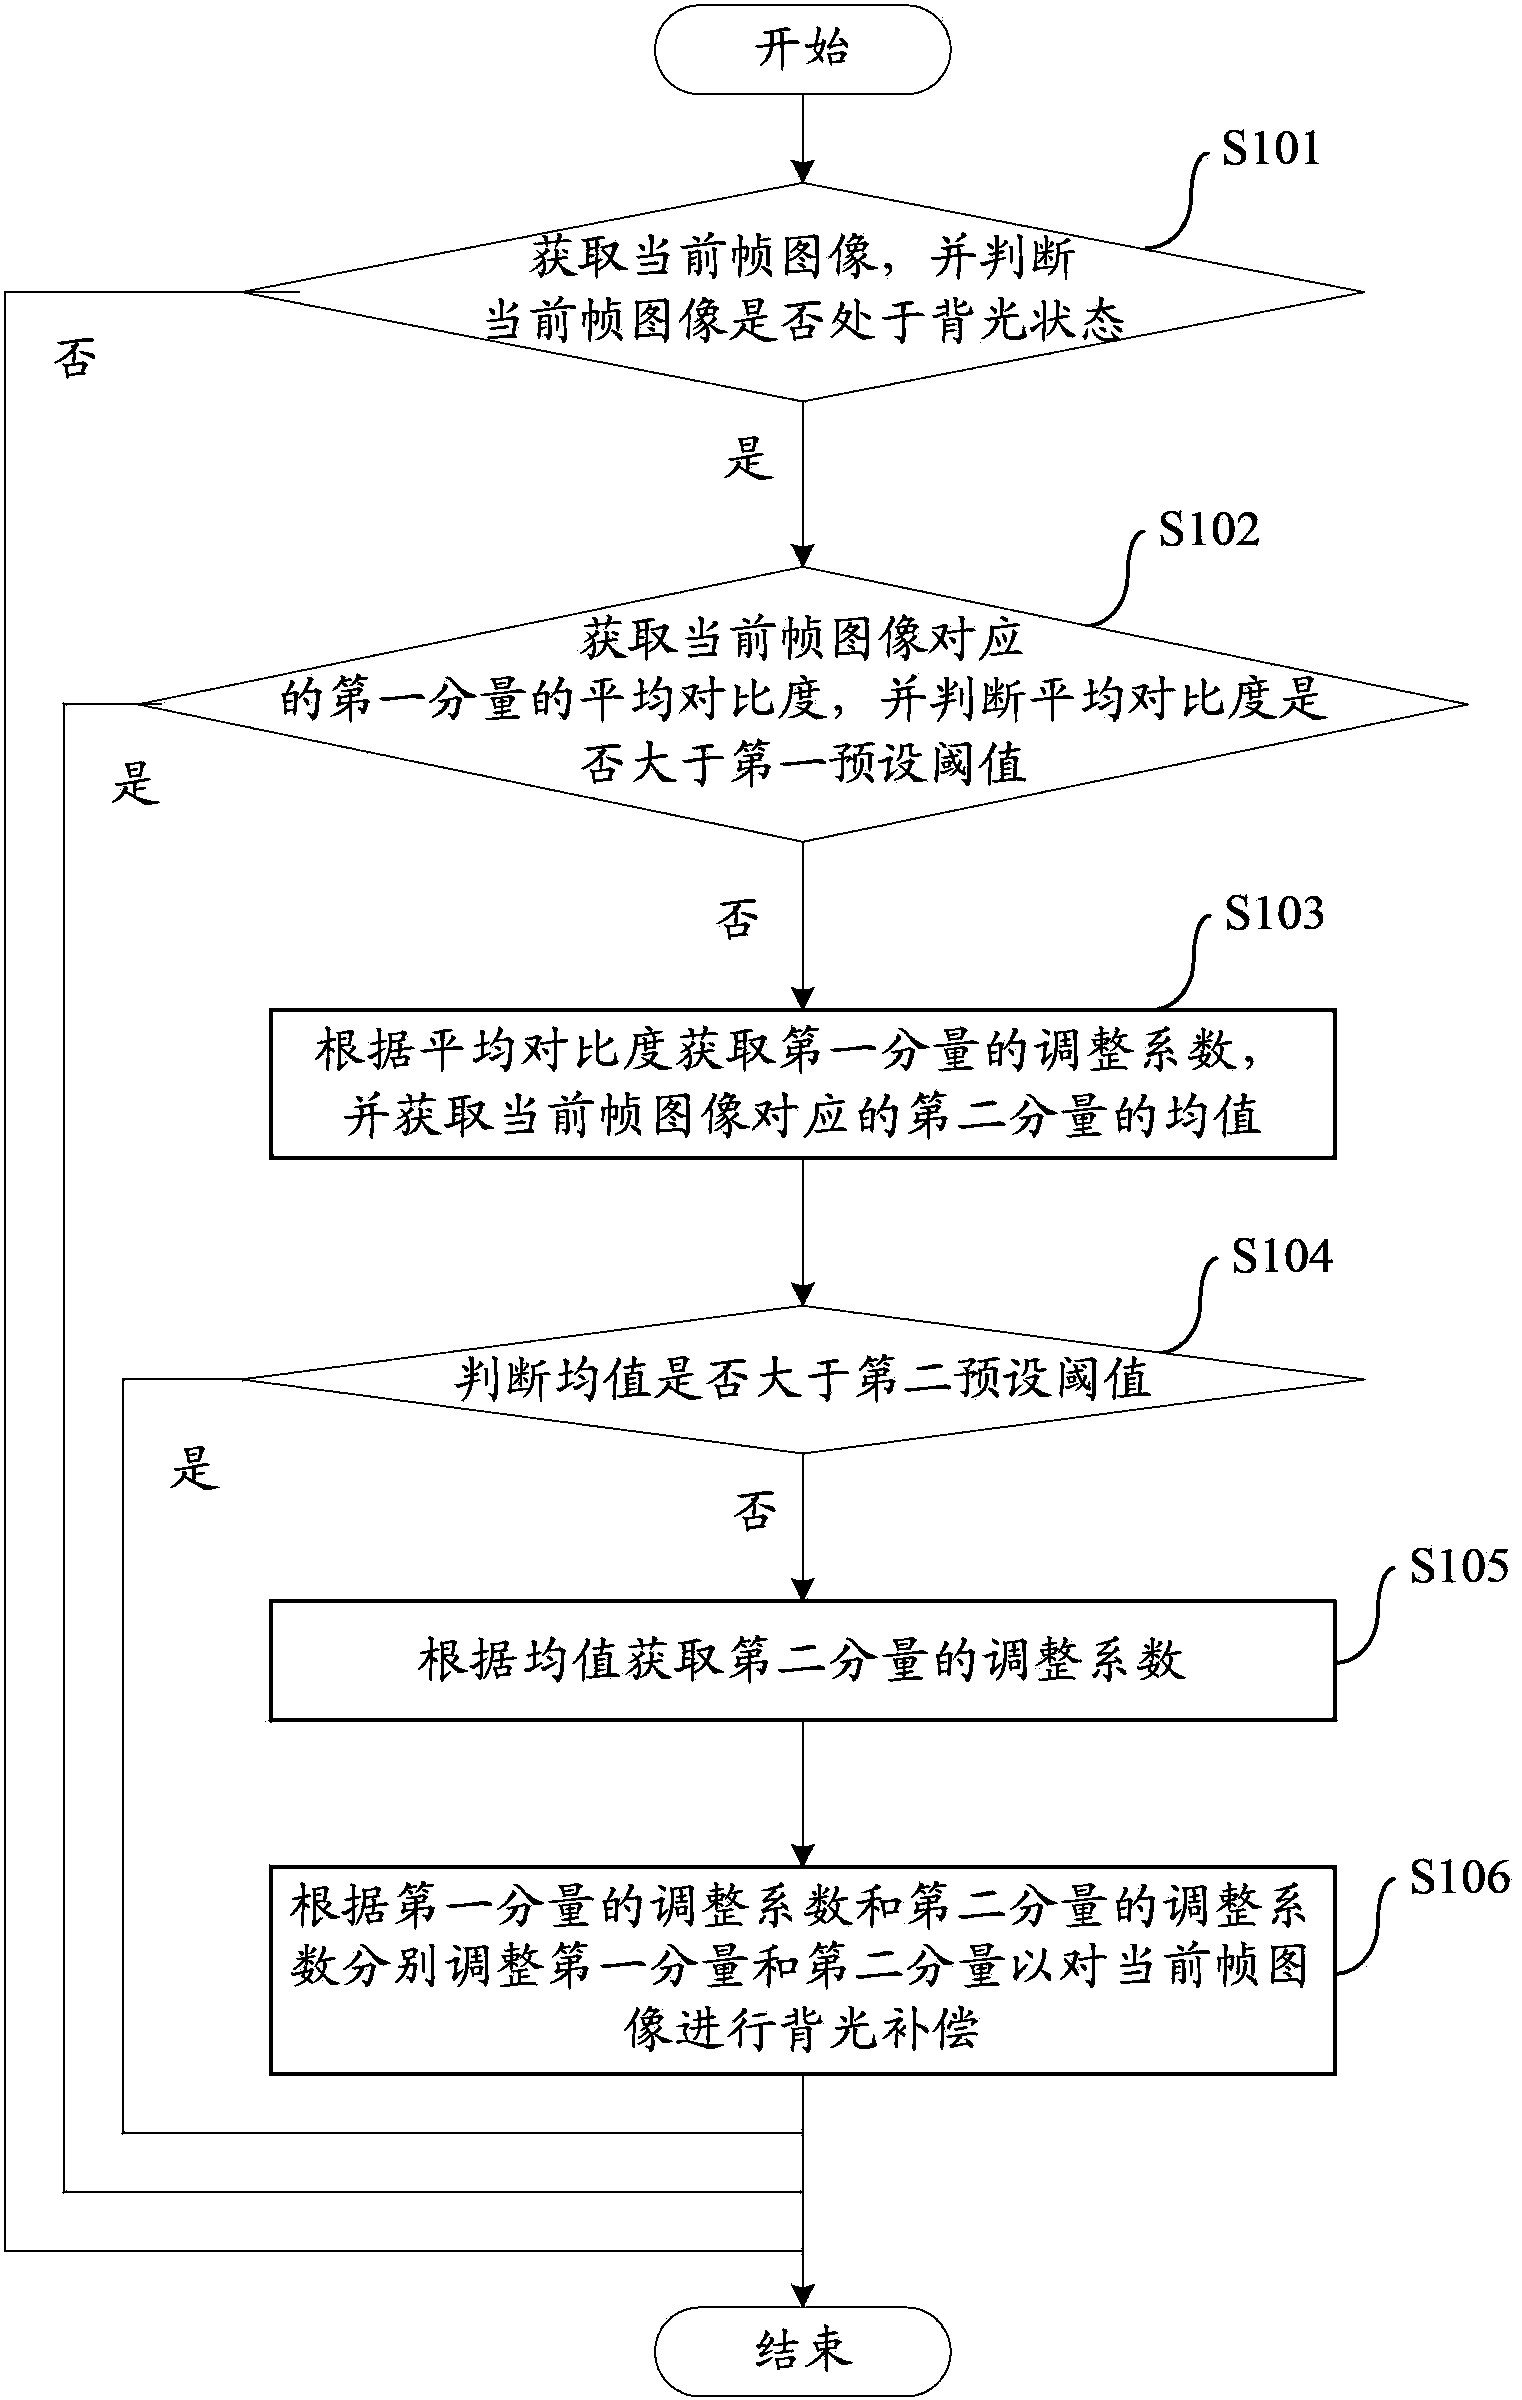 Backlight compensation method and device